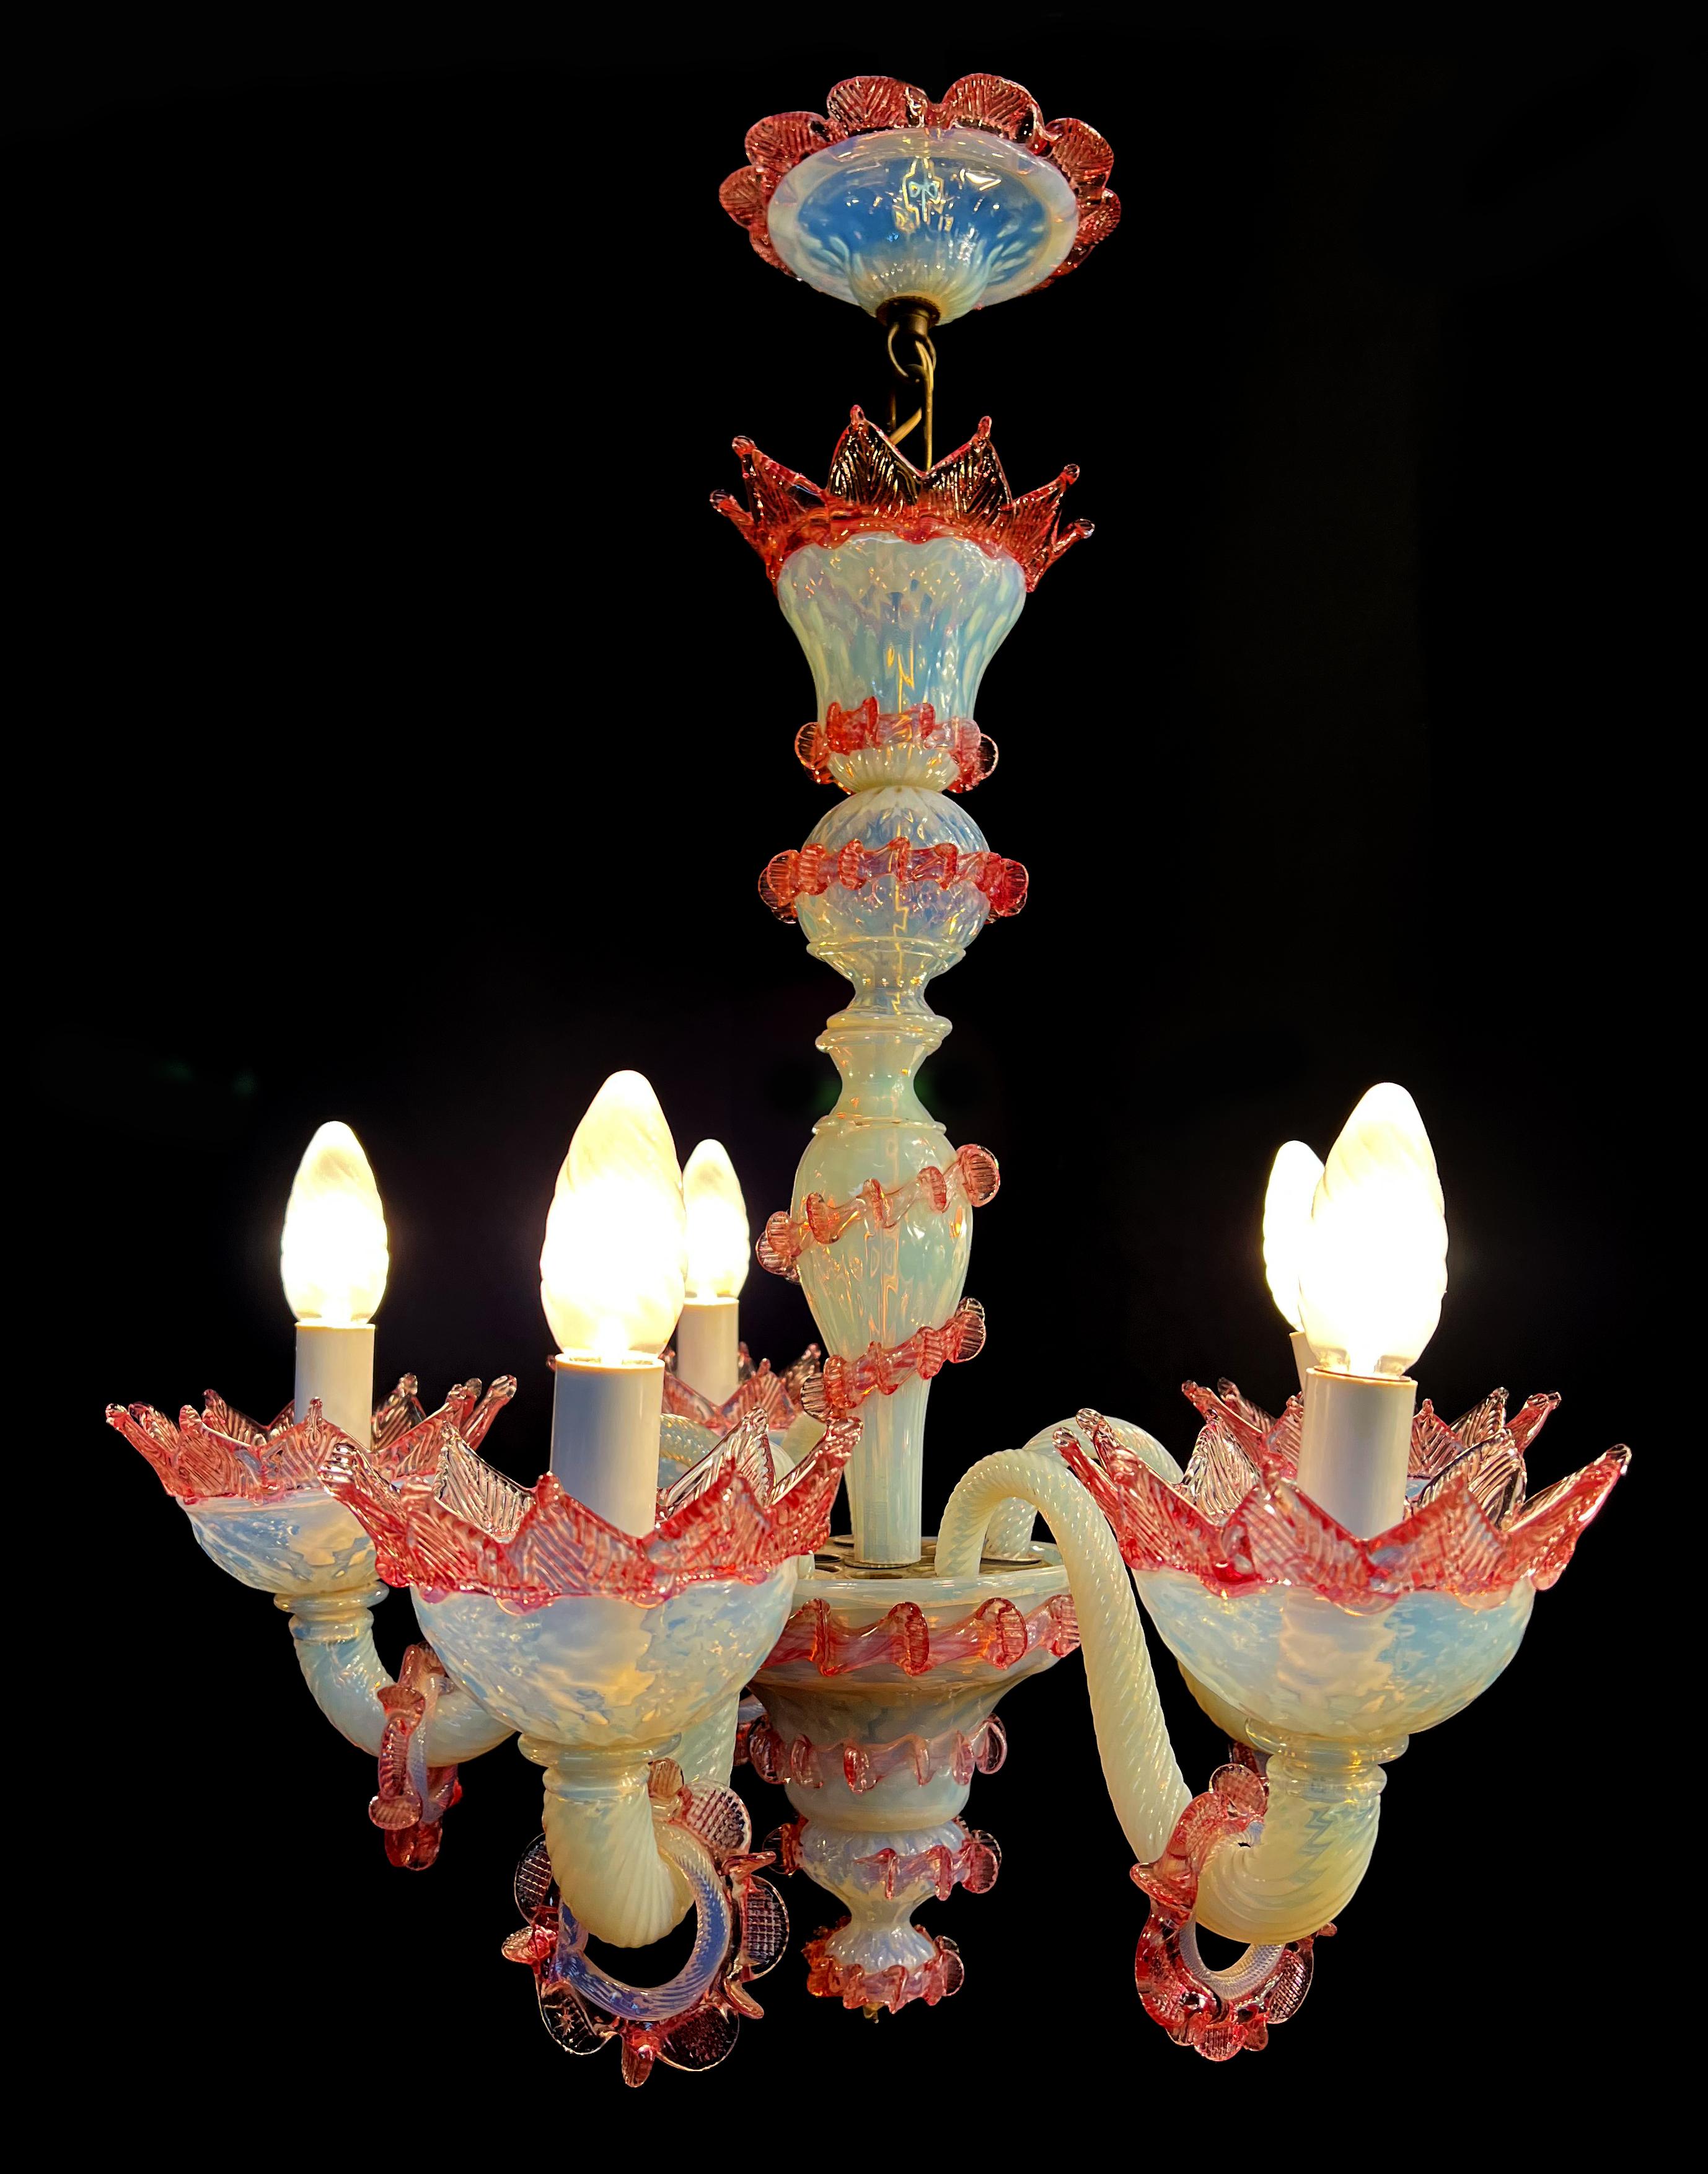 Murano chandelier of awesome beauty. Lights (5) in pure Murano glass paste. Each piece is a jewel.